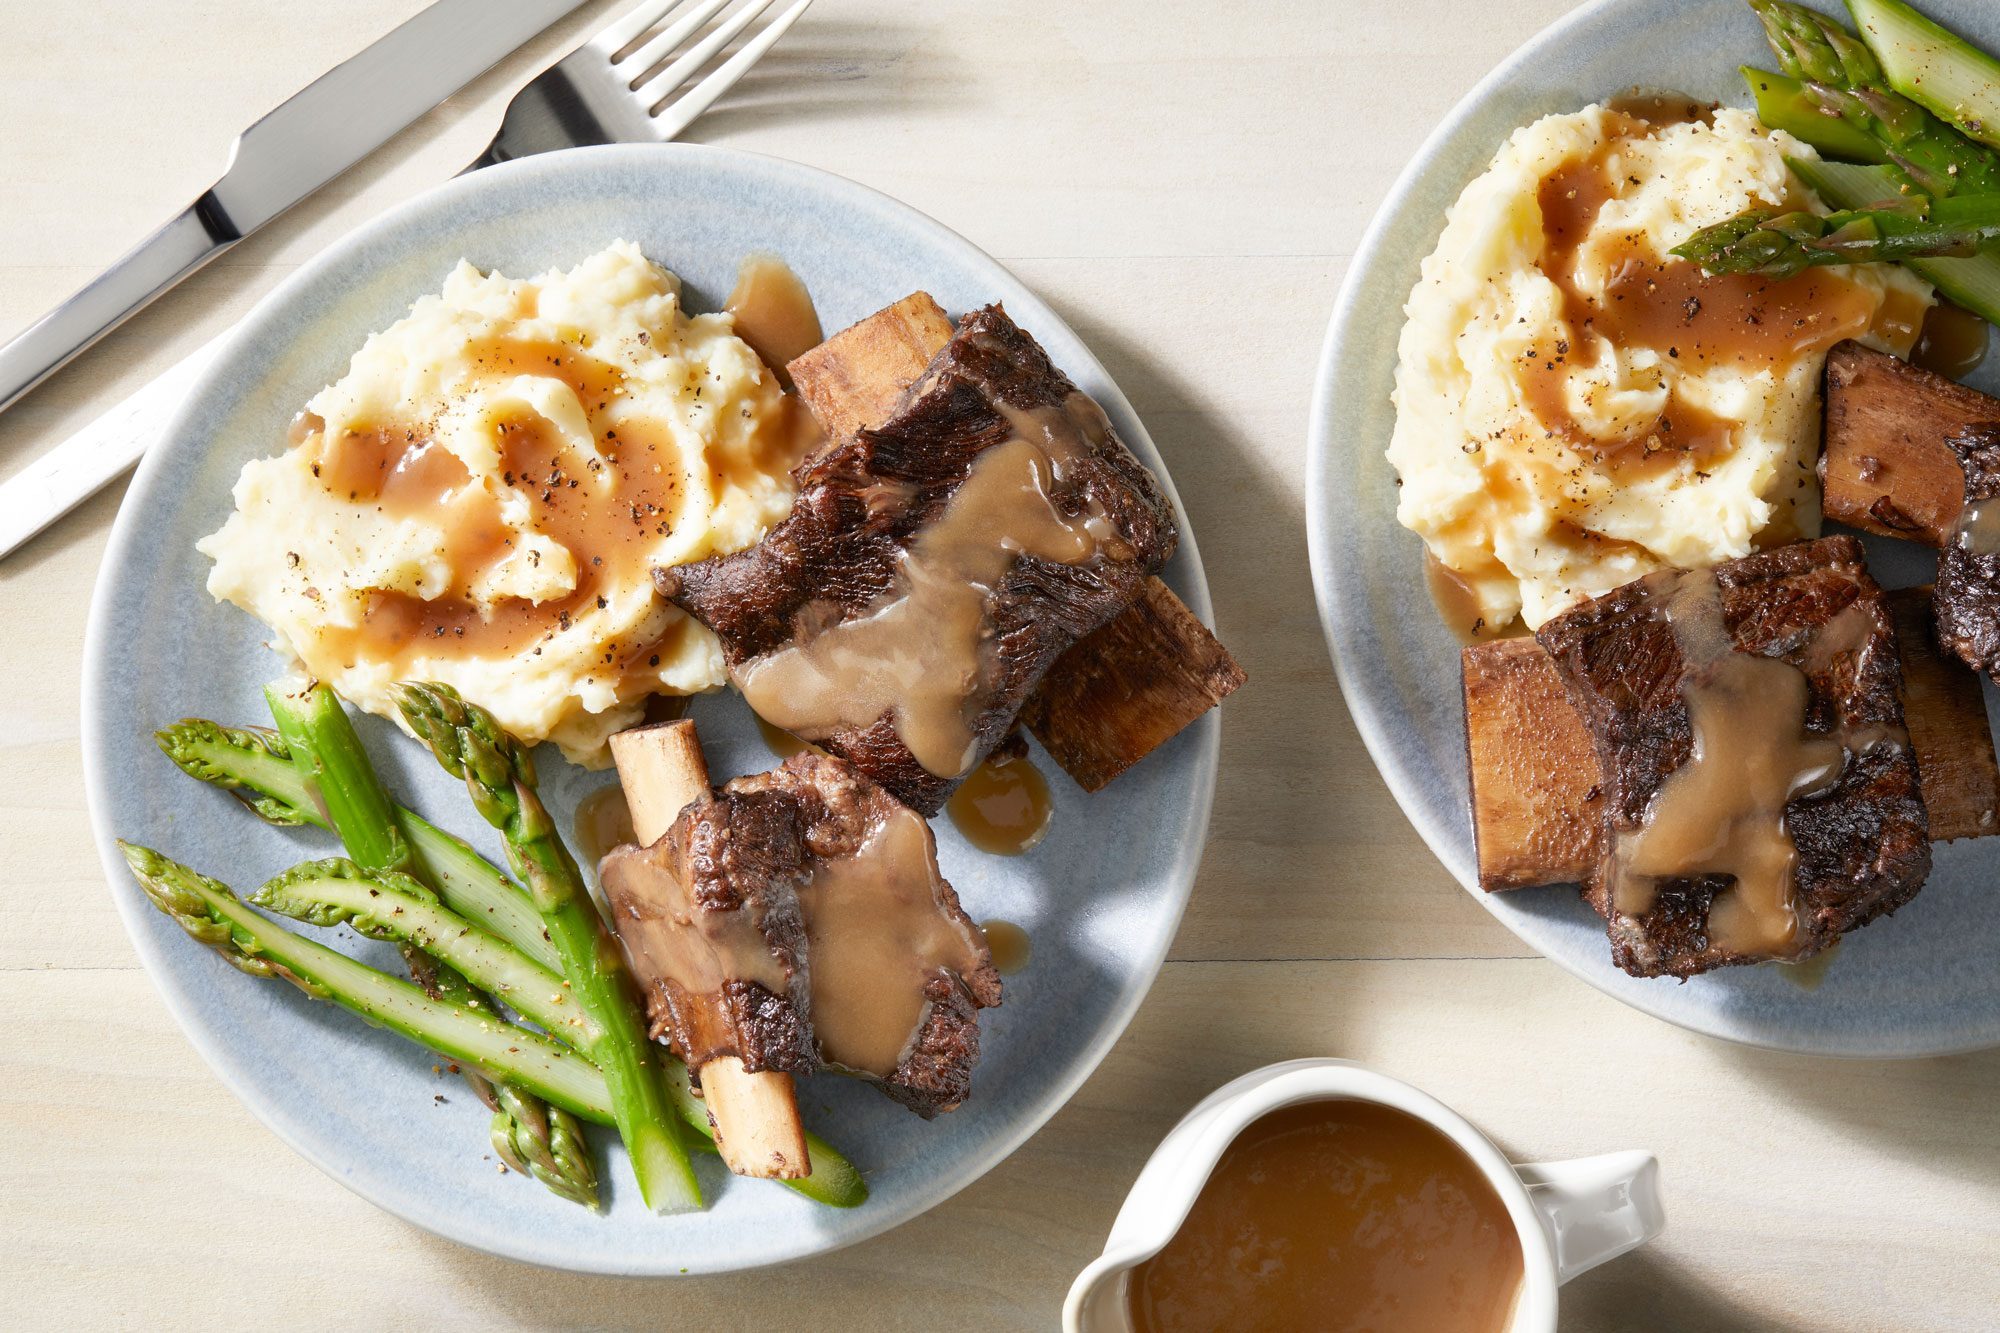 Braised Short Ribs served in two plates with celery